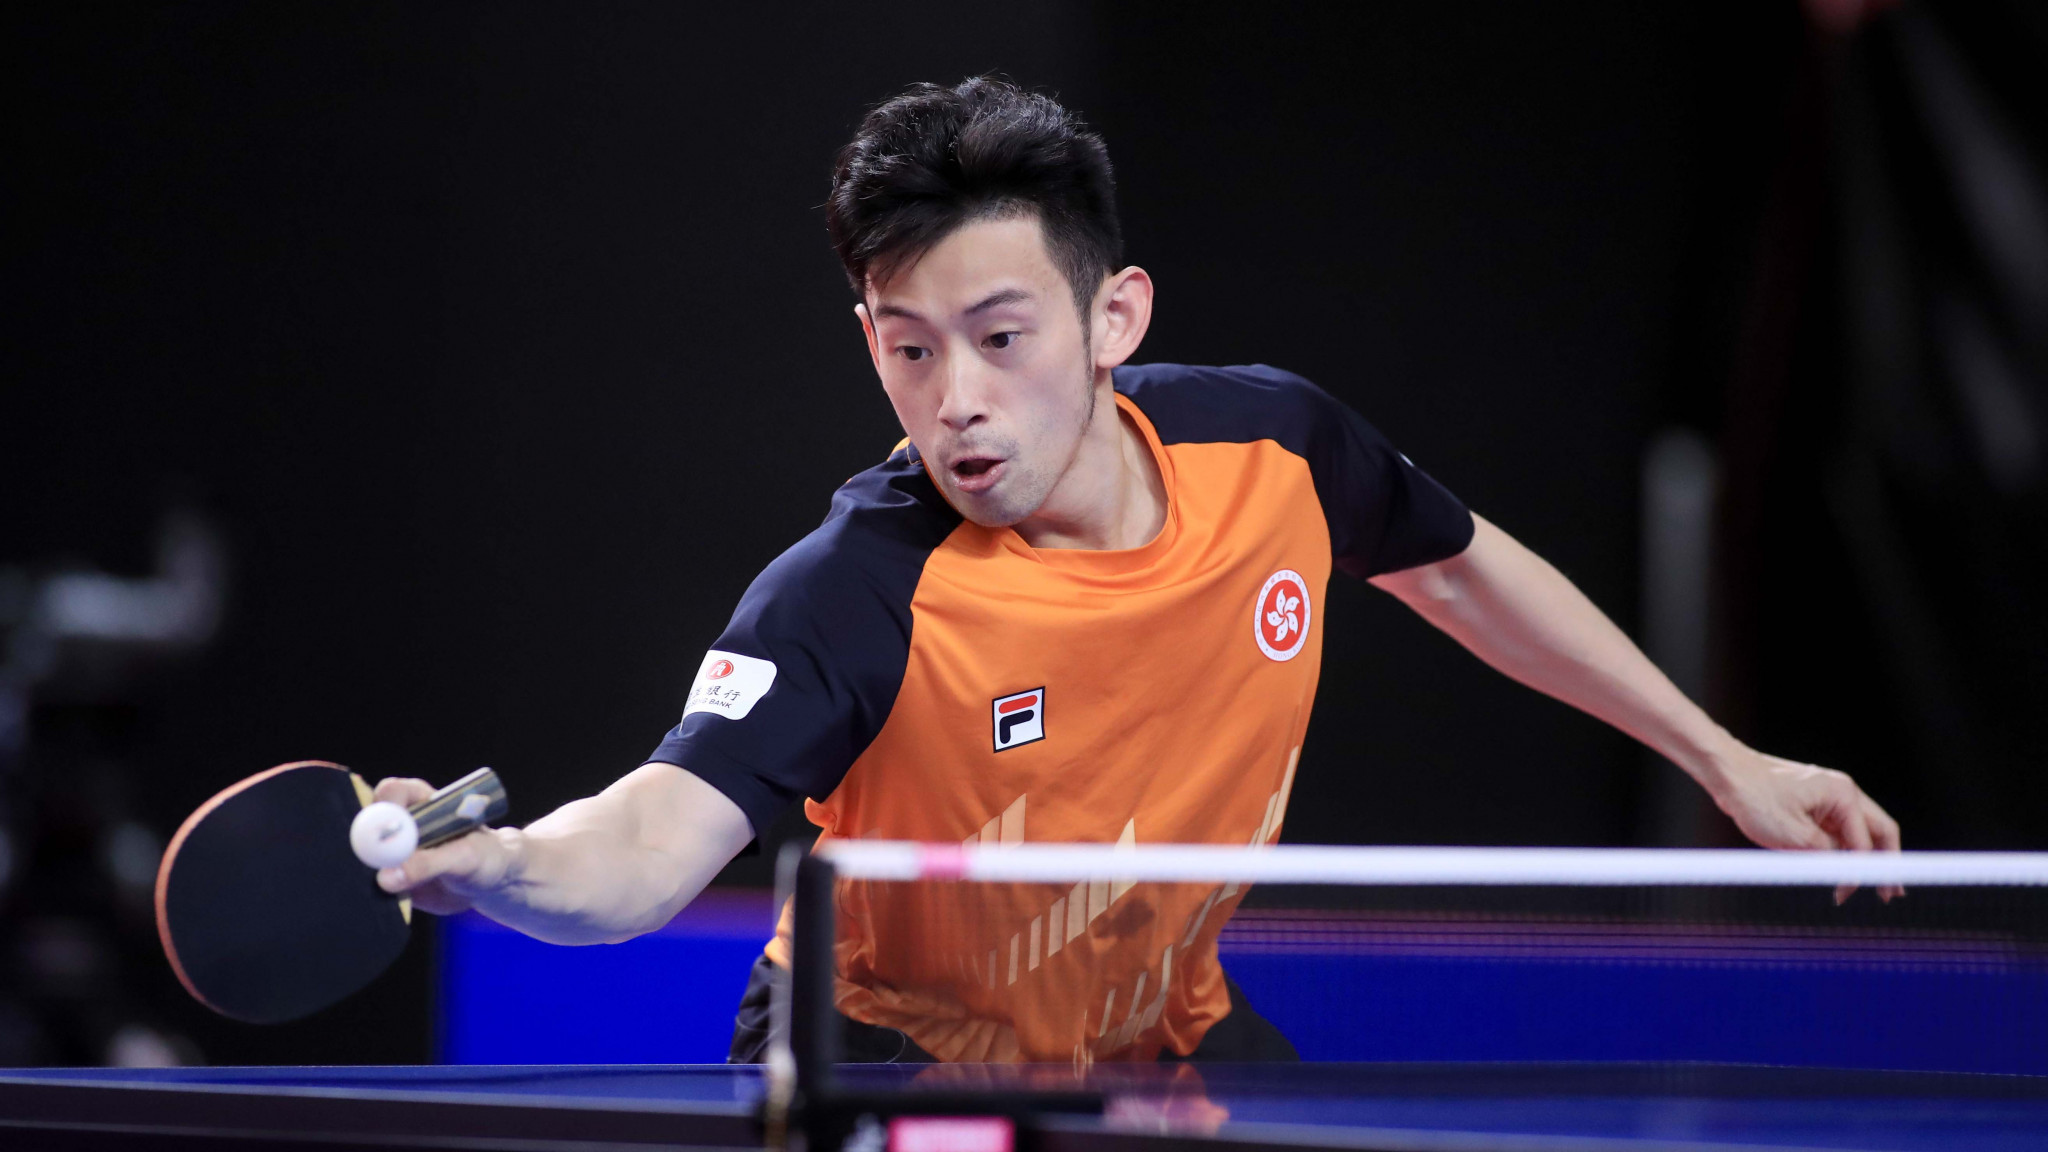 Hong Kong earned a place in the men's event at Tokyo 2020 by beating the Czech Republic in the World Team Qualification Tournament ©ITTF